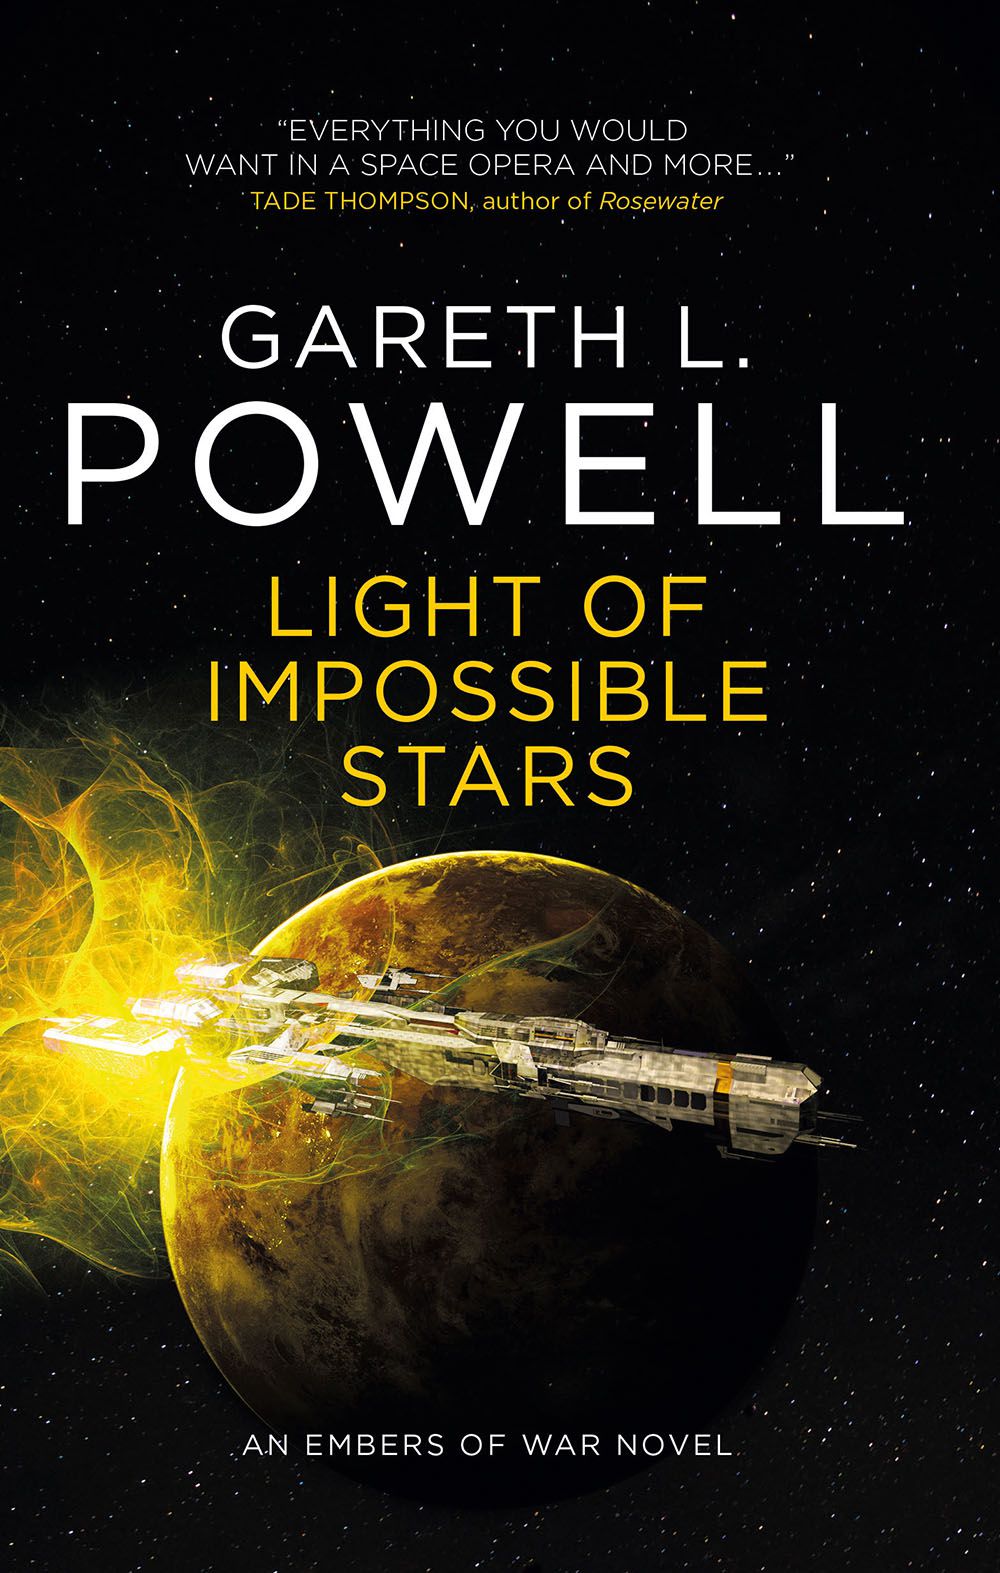 a ship zooms past a planet on the cover of Light of Impossible Stars by Gareth L. Powell